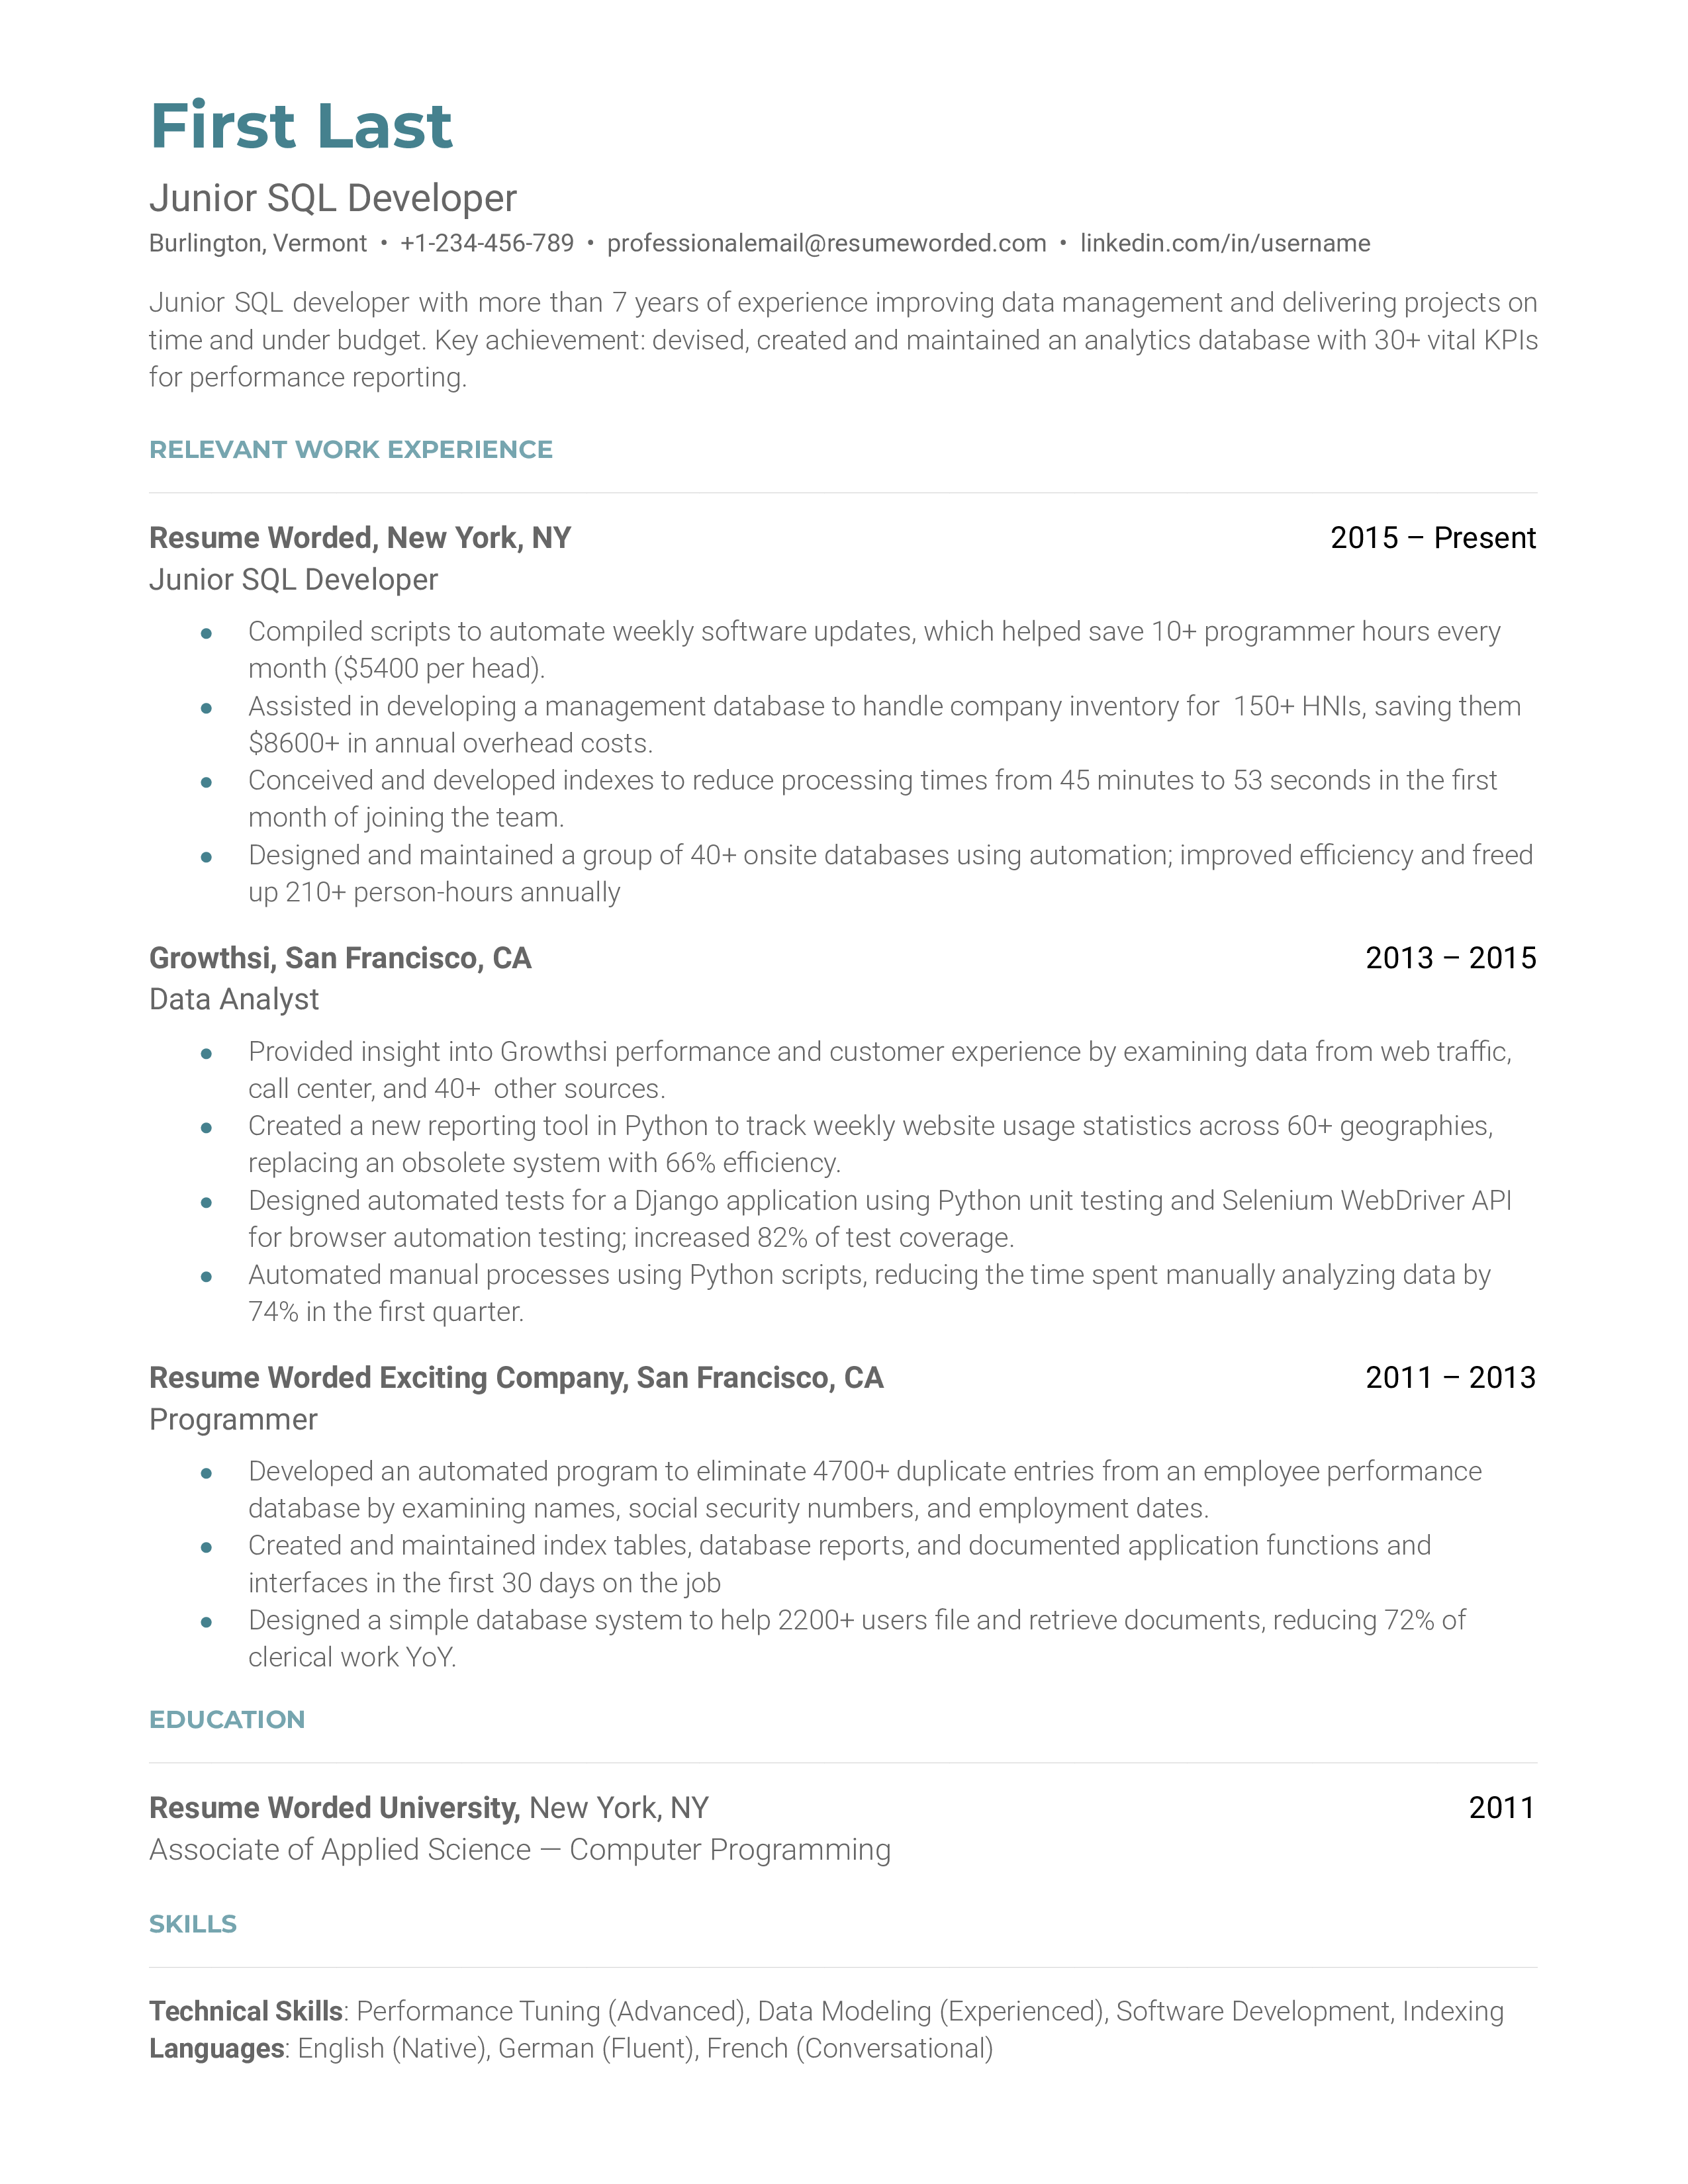 A resume for a junior SQL developer with a bachelor's degree in computer science and experience as a database developer.